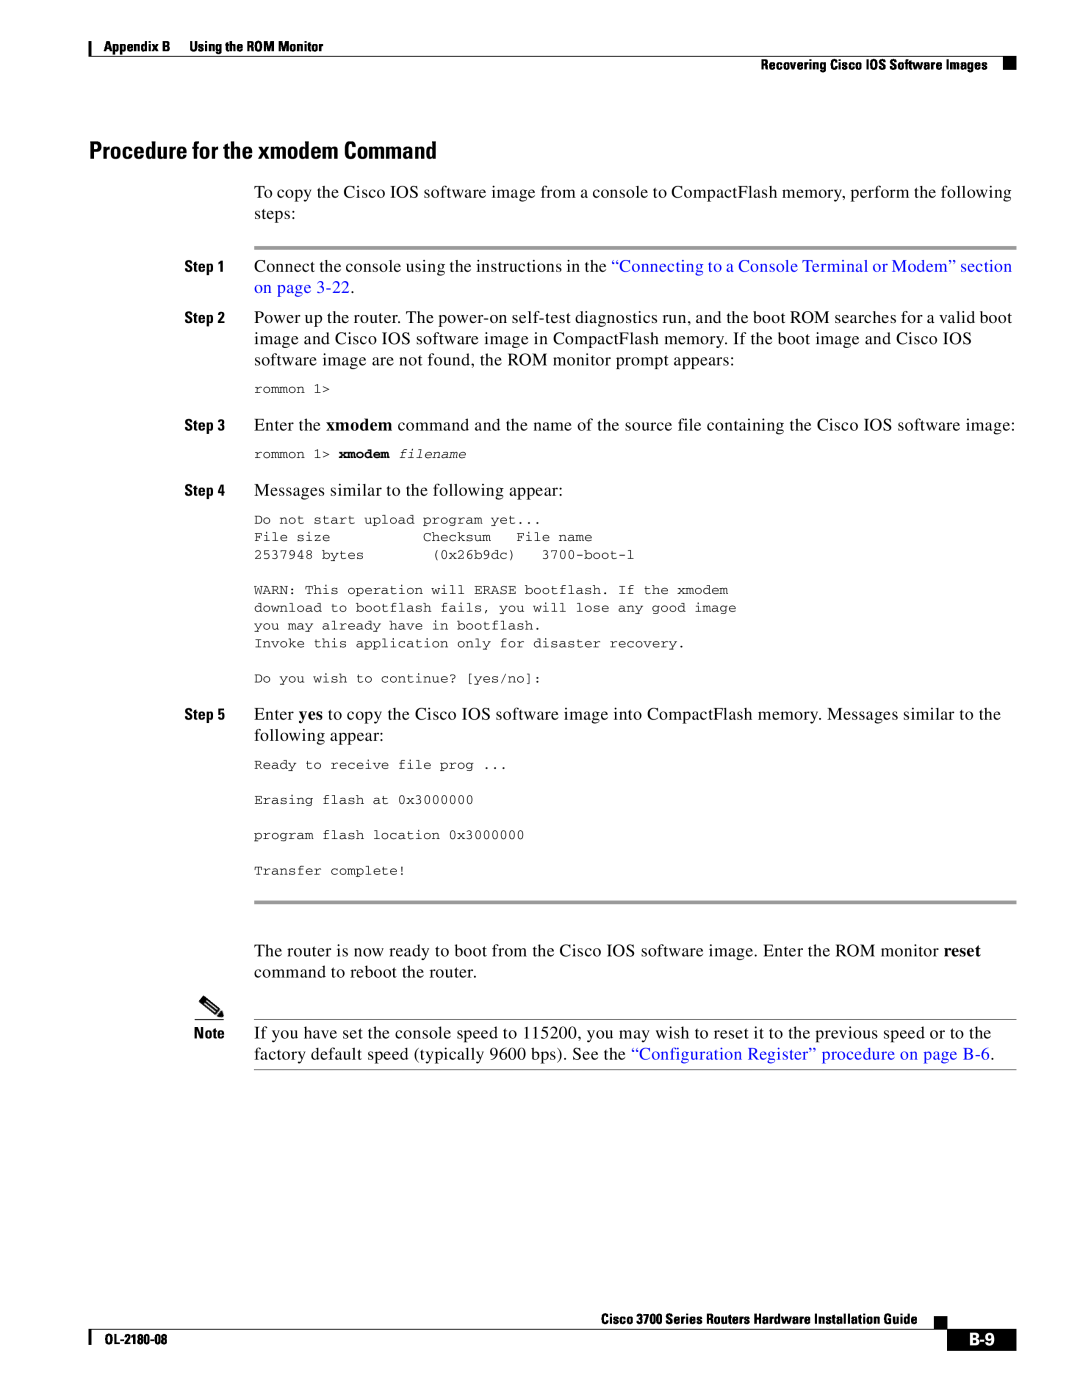 Cisco Systems 3700 Series manual Procedure for the xmodem Command 